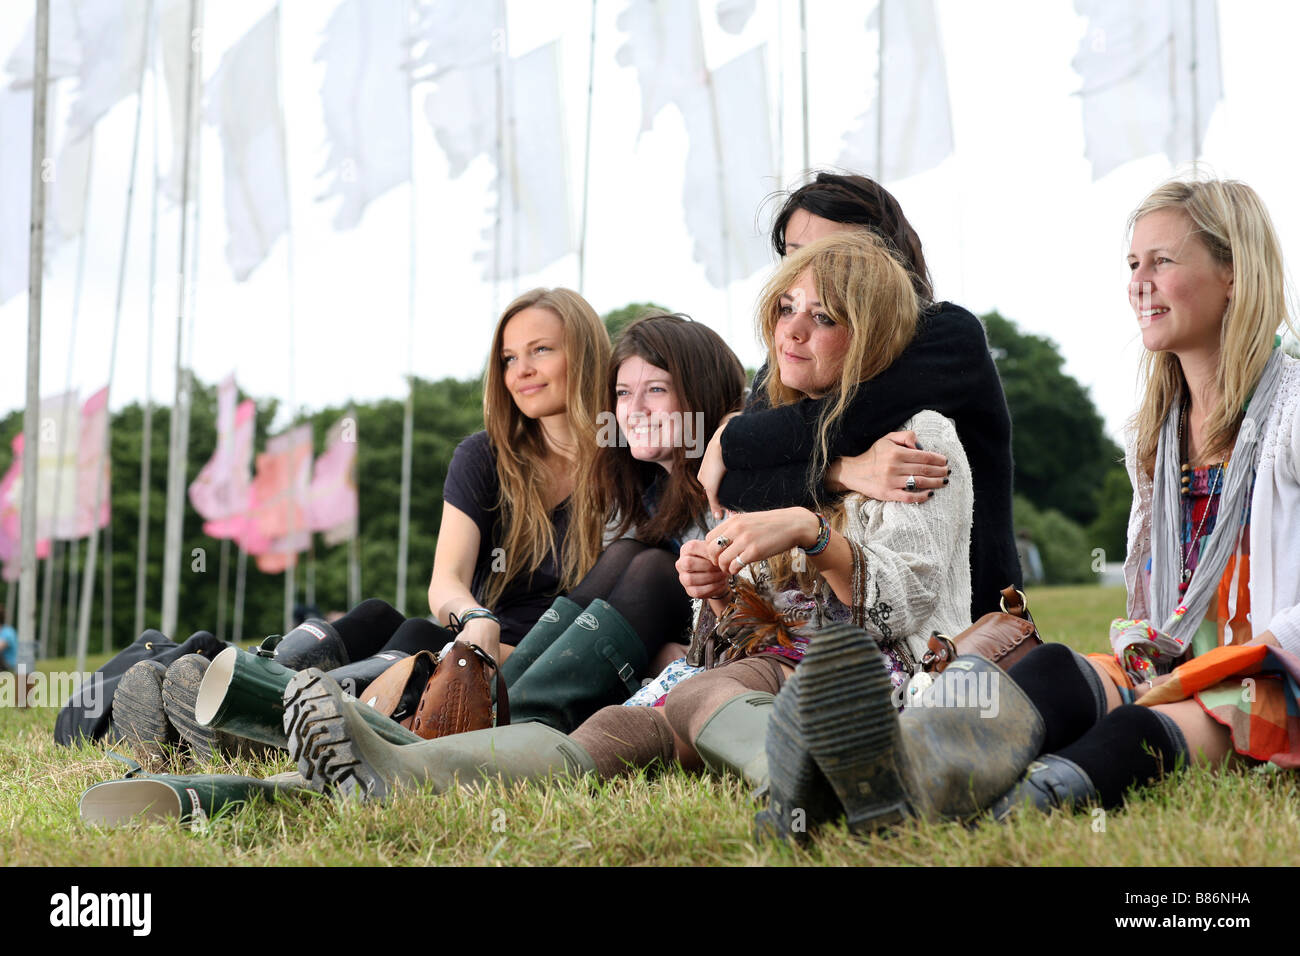 A group of girls enjoy the music sat among flags at the Glastonbury Festival in Pilton, Somerset in the UK. Stock Photo